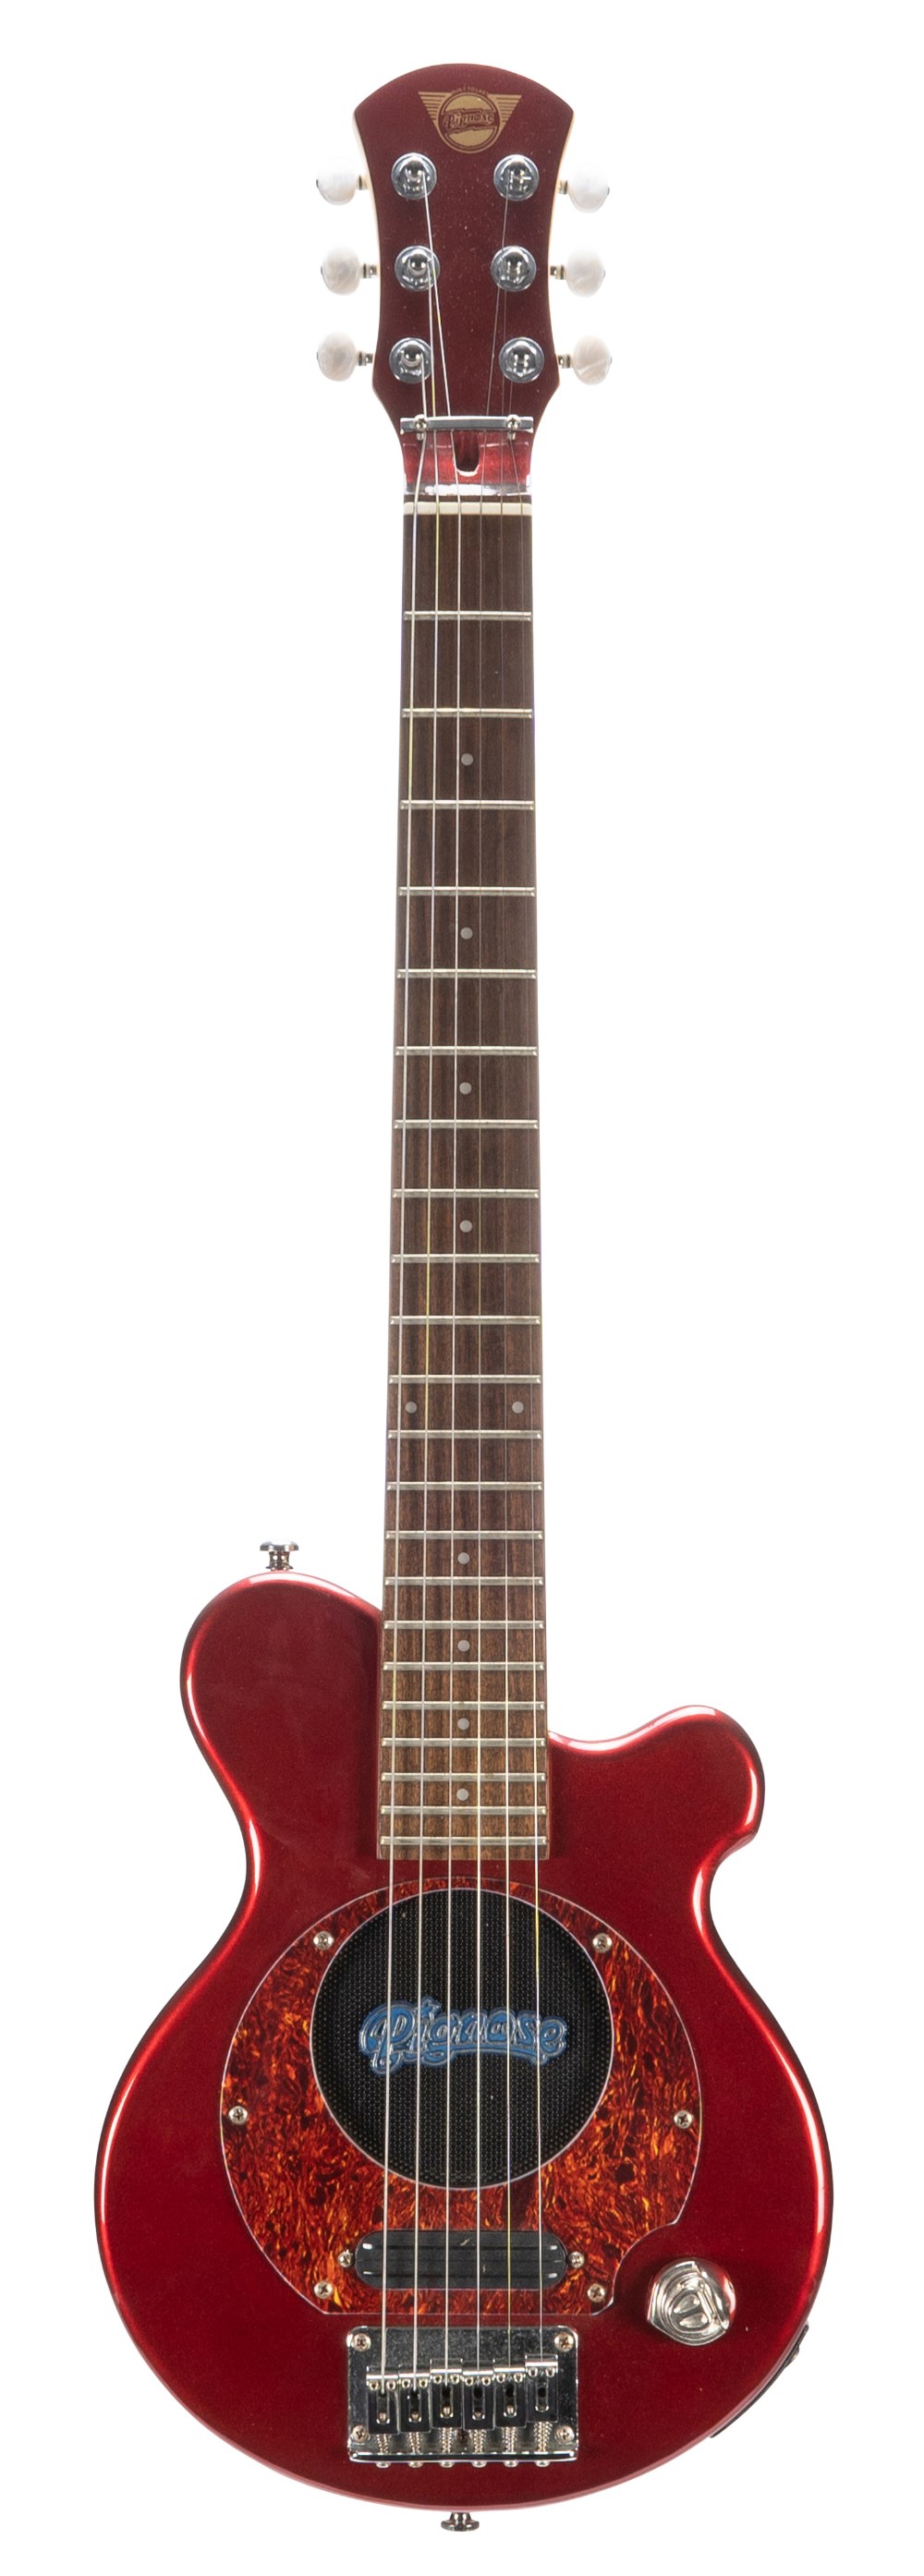 Pignose PGG-200 electric guitar; Finish: candy apply red; Case: original gig bag; Overall condition: